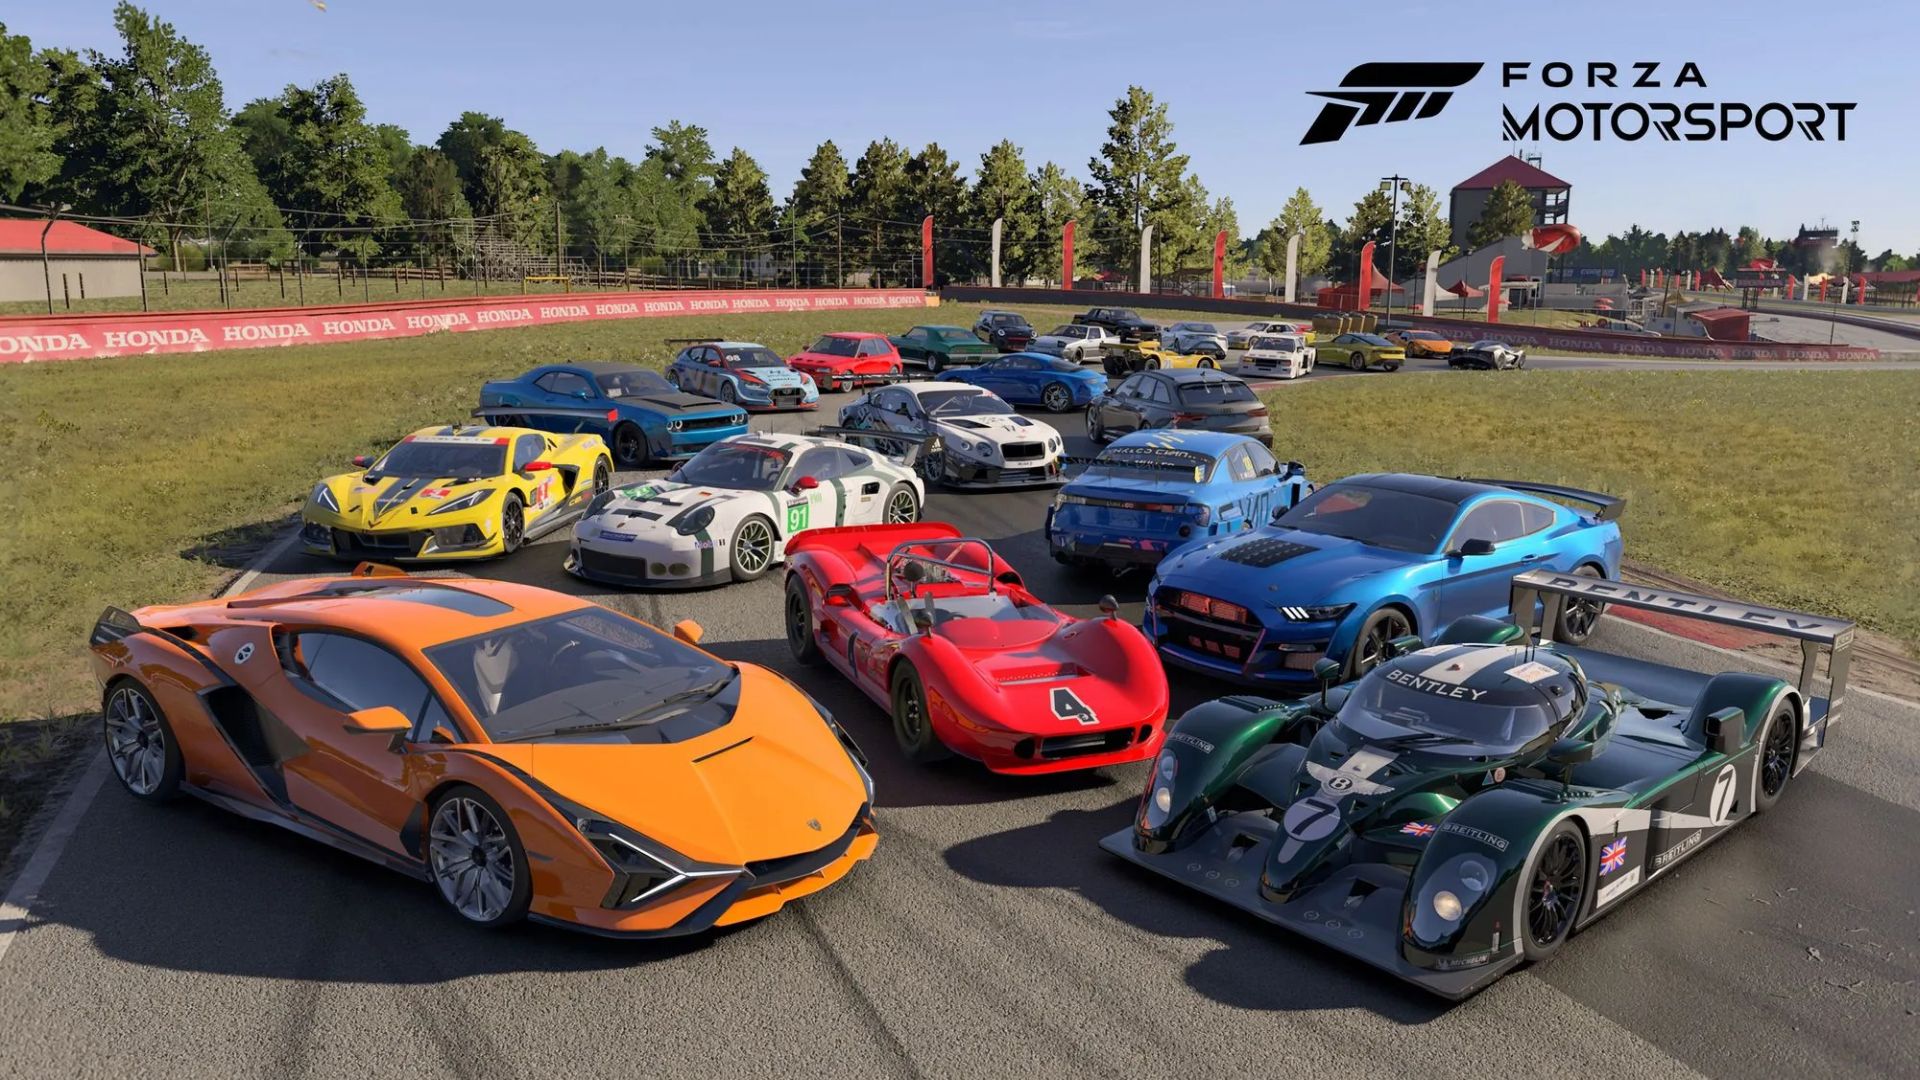 Forza Motorsport Premium Edition Grants 5 Days of Early Access